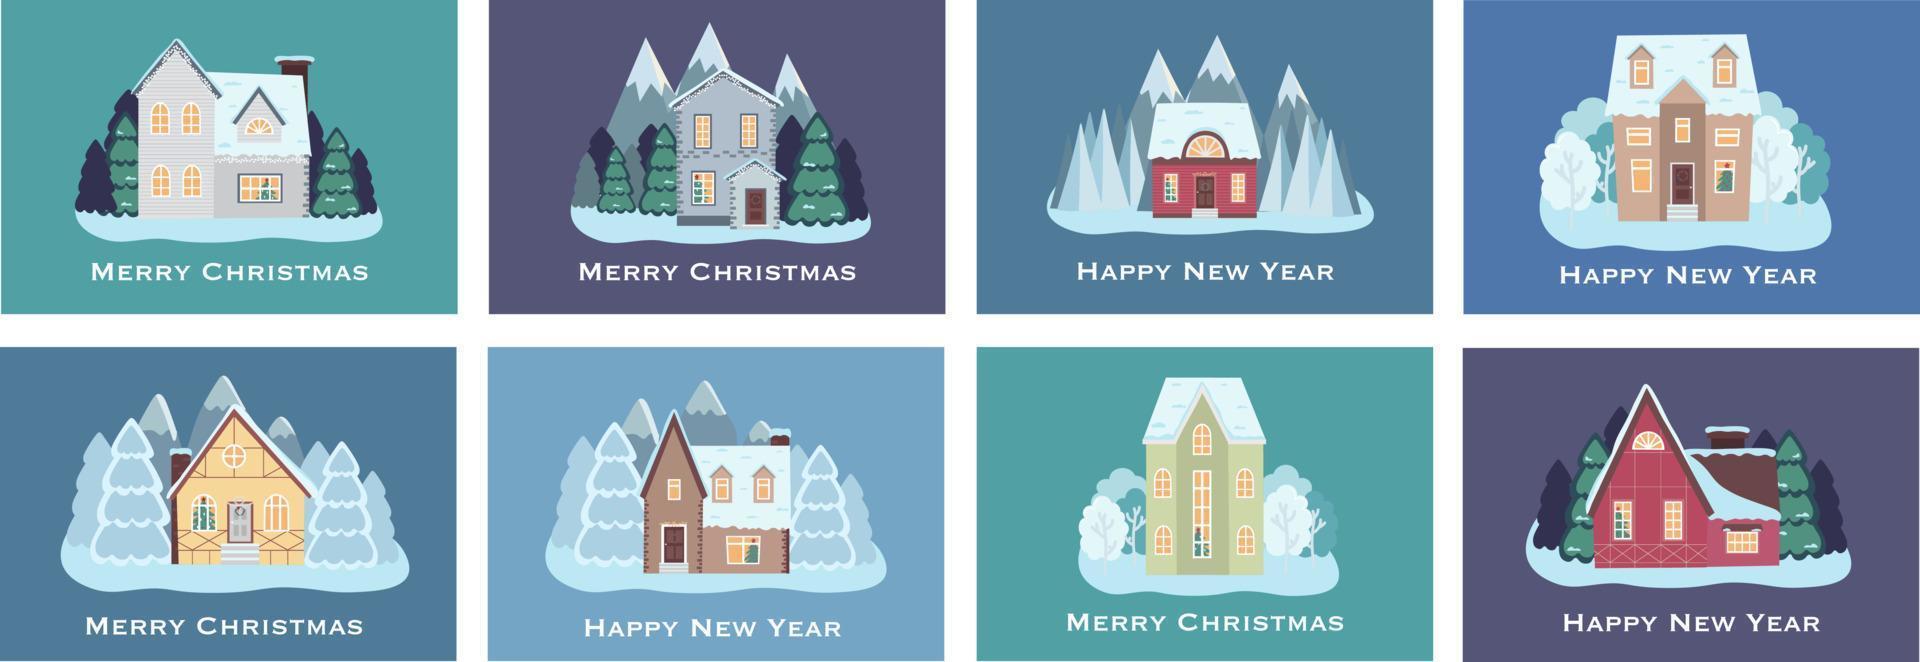 Set of Christmas cards with houses, fir trees and snow with the inscription Merry Christmas vector